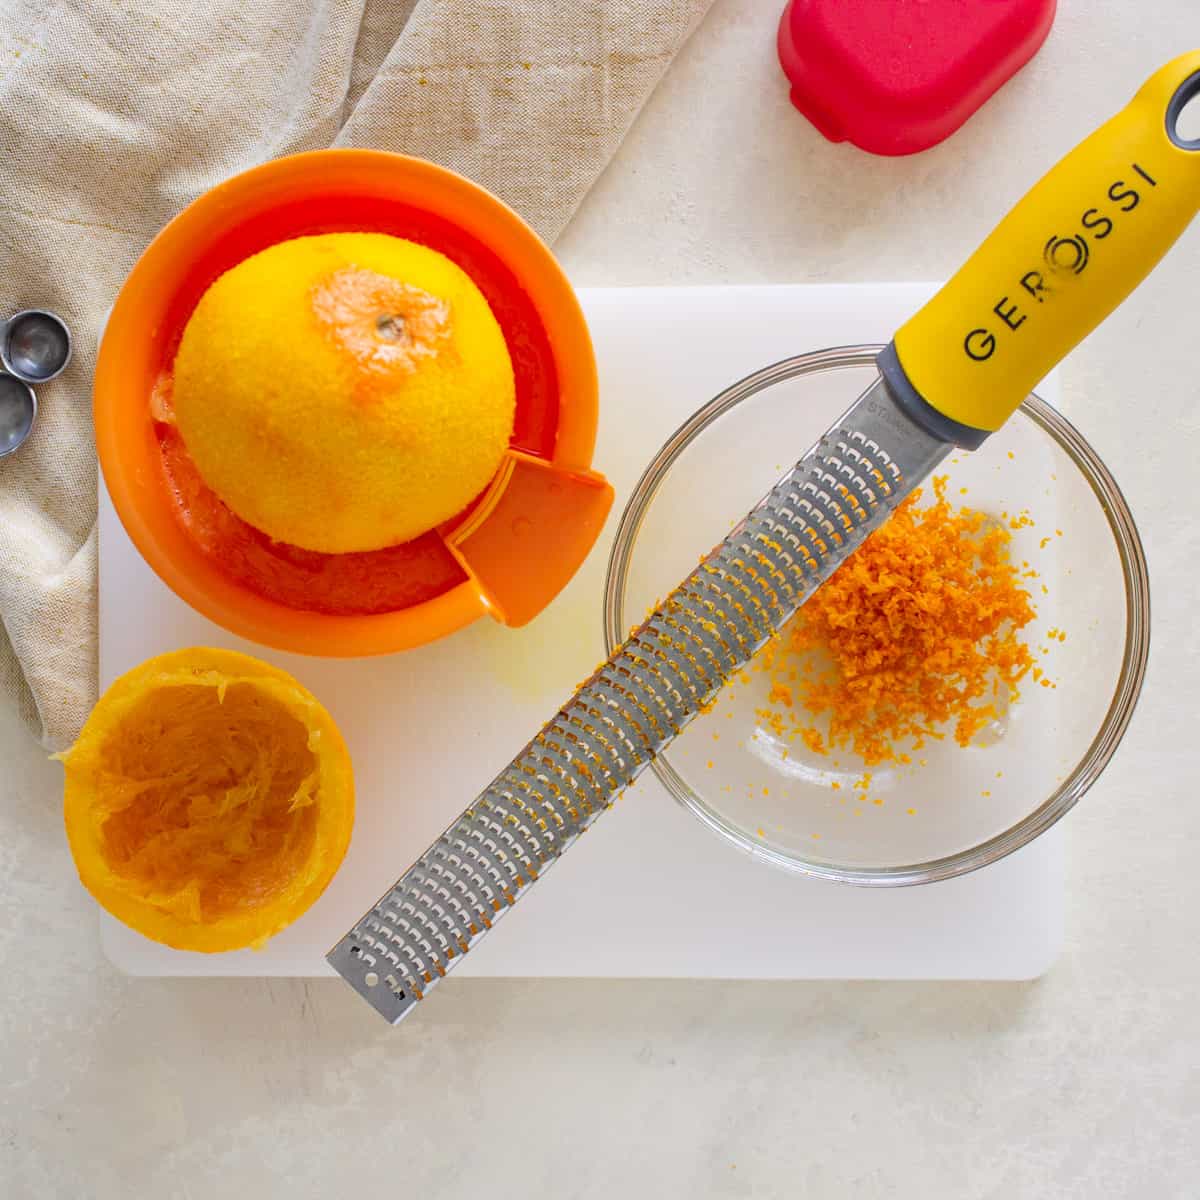 Orange zest in a small bowl with a microplane setting on top and, a zested orange half on a citrus juicer.